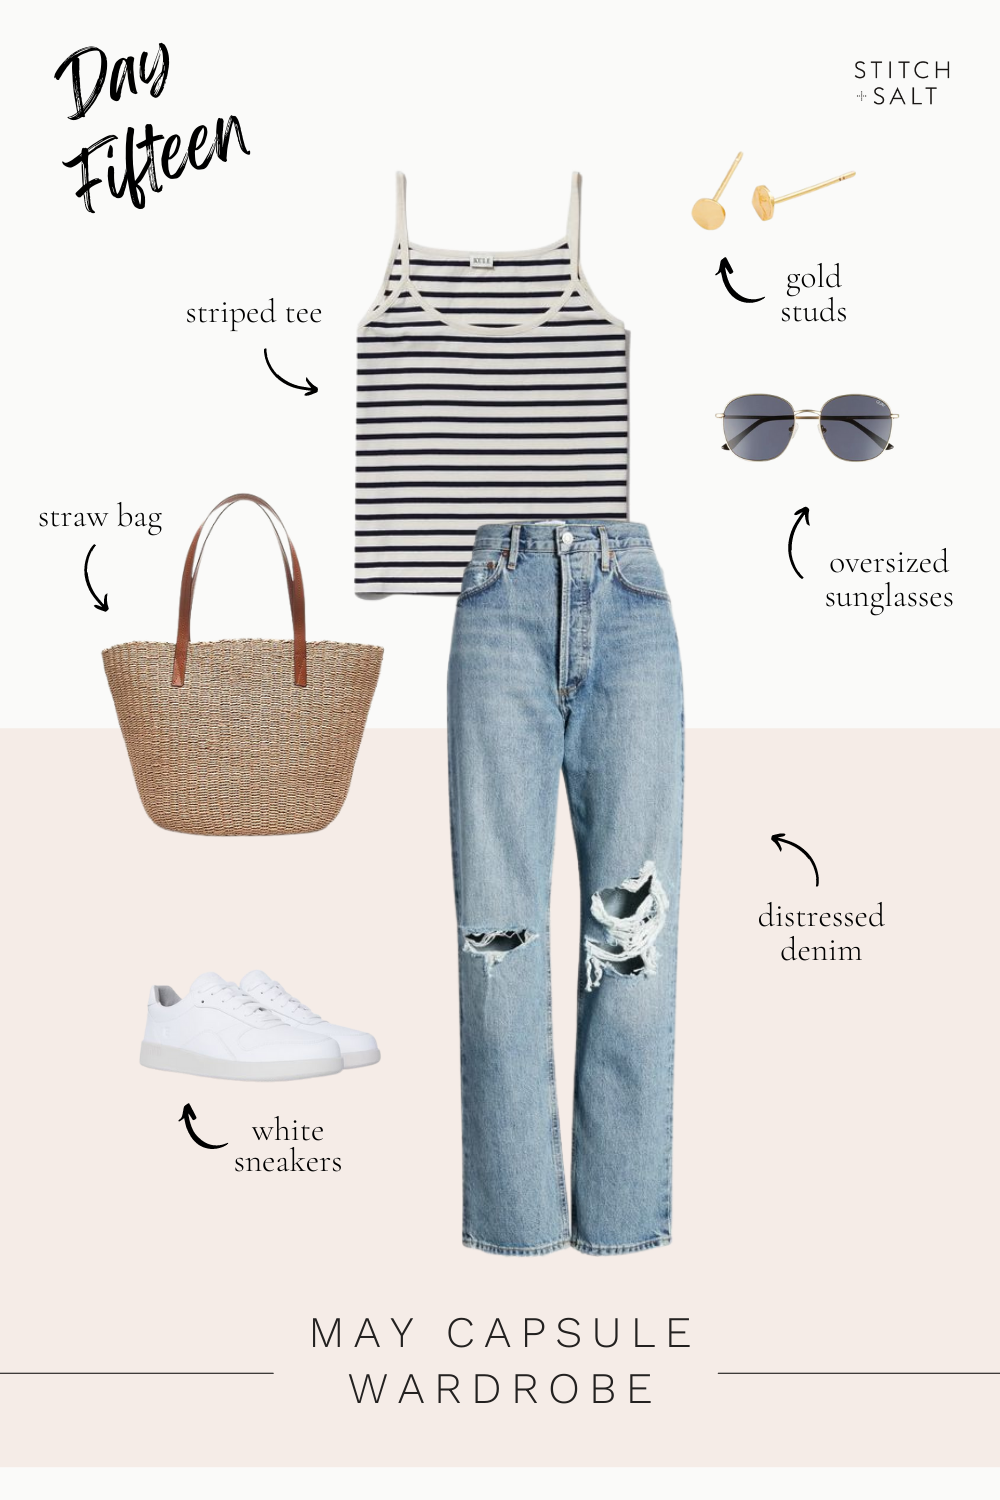 May Capsule Wardrobe Plus 30 Outfit Ideas! - Stitch & Salt